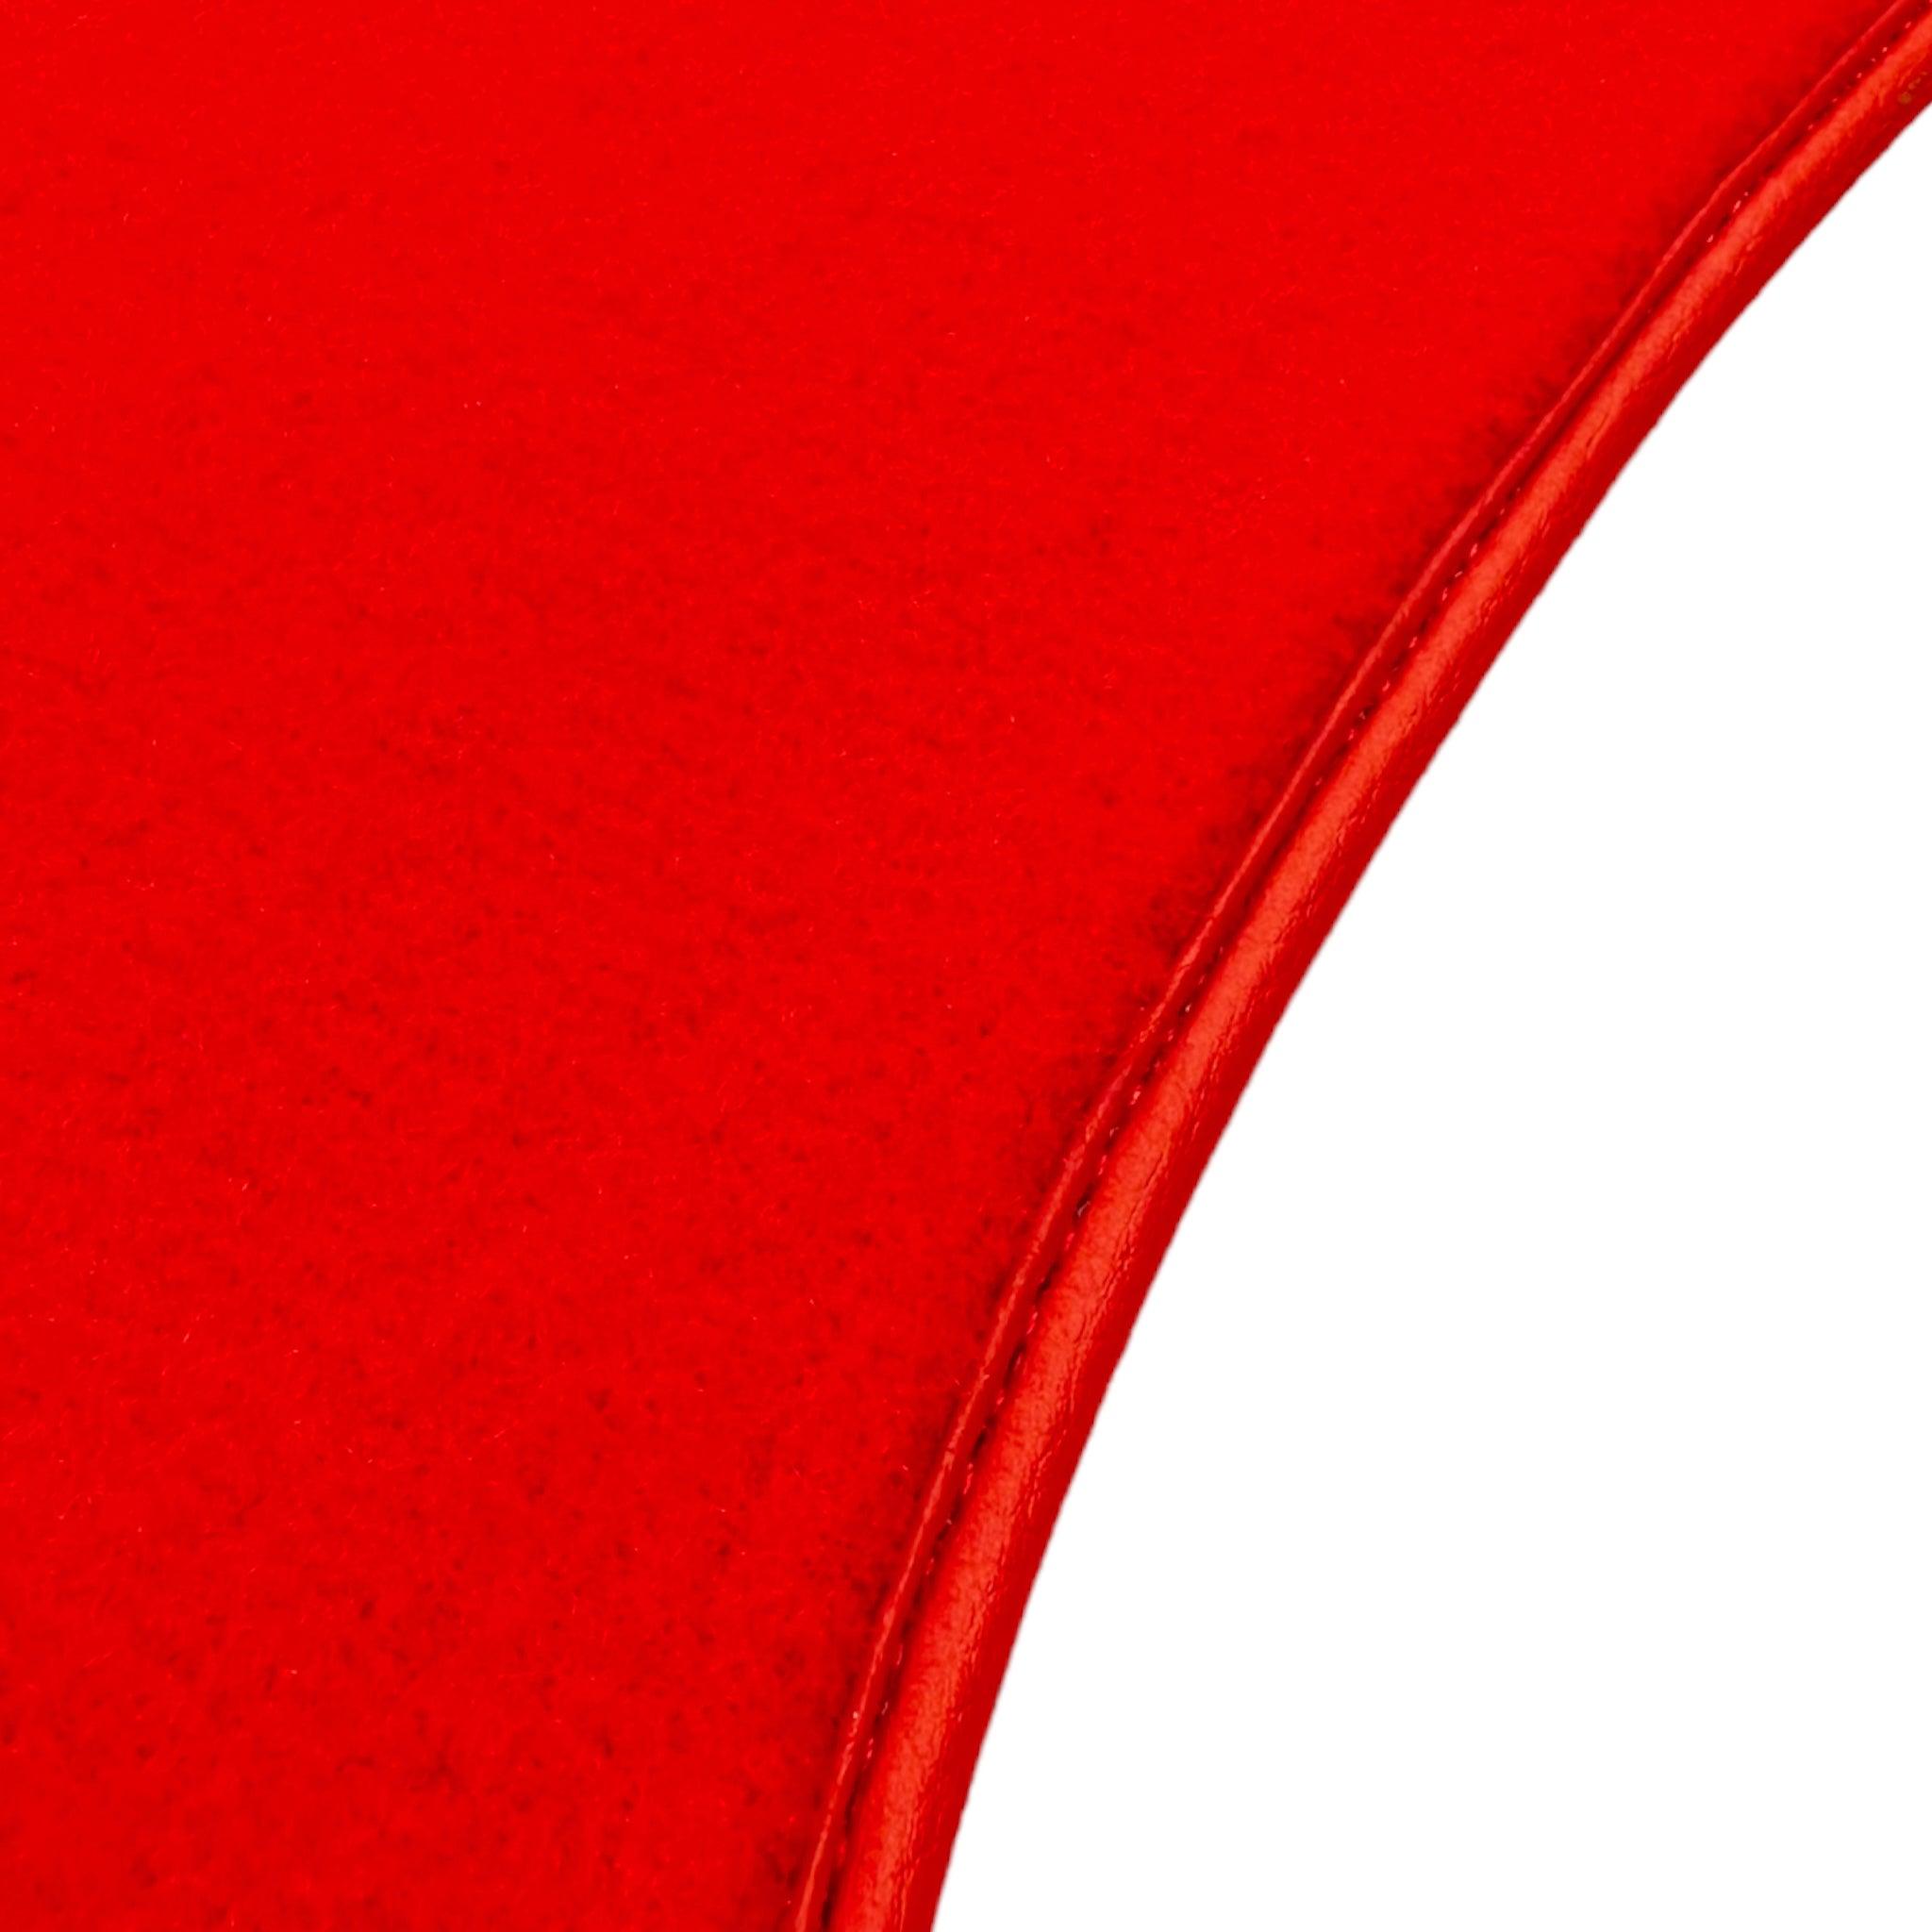 Red Floor Mats For Mercedes Benz EQS-Class V297 (2021-2023) | Limited Edition